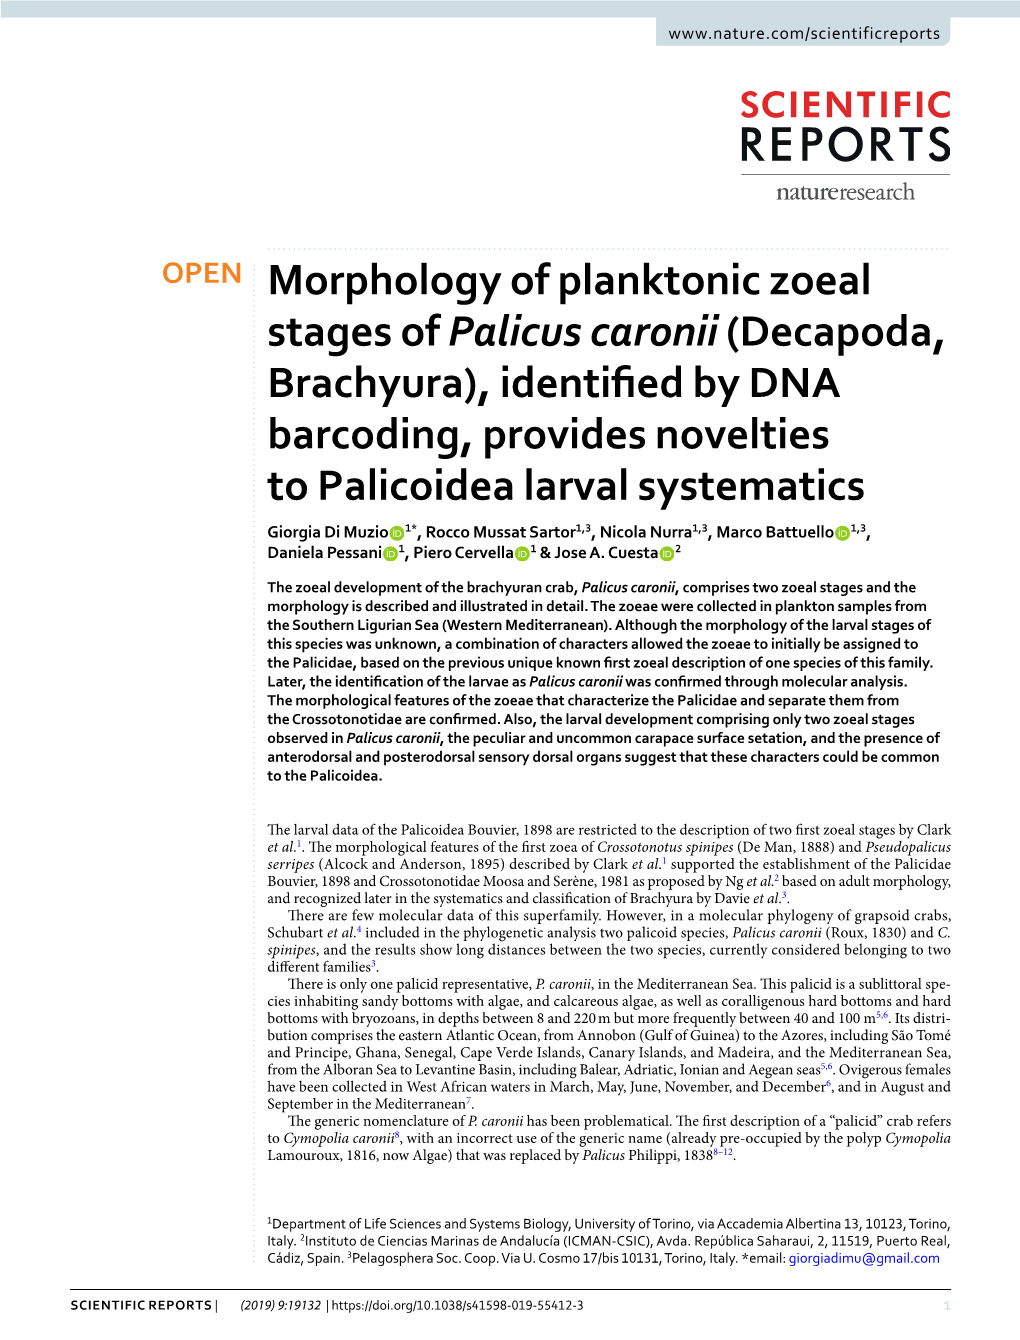 Morphology of Planktonic Zoeal Stages of Palicus Caronii (Decapoda